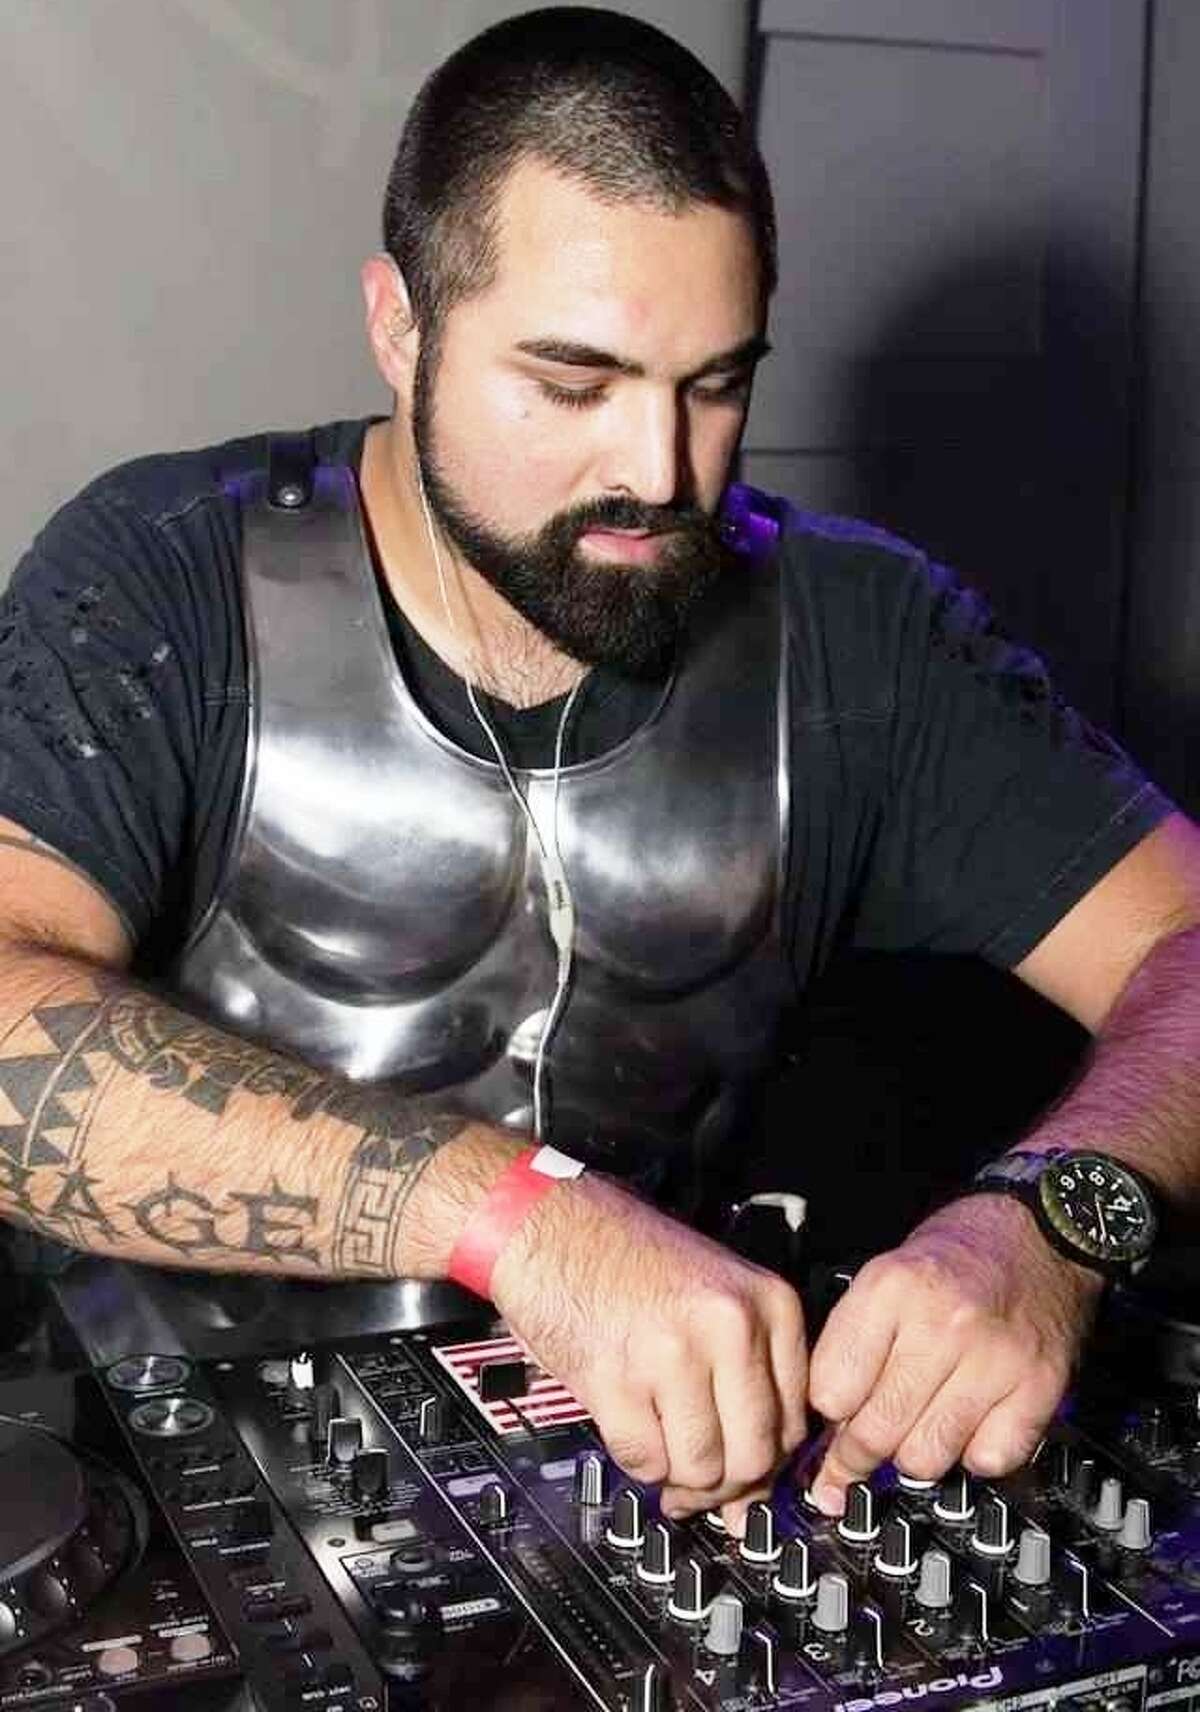 Who knew that electronic dance music (EDM) could be therapeutic? The proof is at Friday's Military Electric event, an EDM show that features eight DJs, six of whom have served in the military. Put together by Iraq veteran Michael Garcia, the lineup includes DJ Derrick Rage (pictured), who lost part of a leg in Afghanistan. Garcia said EDM helped him with his PTSD. "It's healing, and I know a lot of soldiers who feel the same way." 6 p.m. Friday, Aztec Lounge, 201 E. Commerce St. $5; free with military ID. Ages 21 and up.-- Lorne Chan